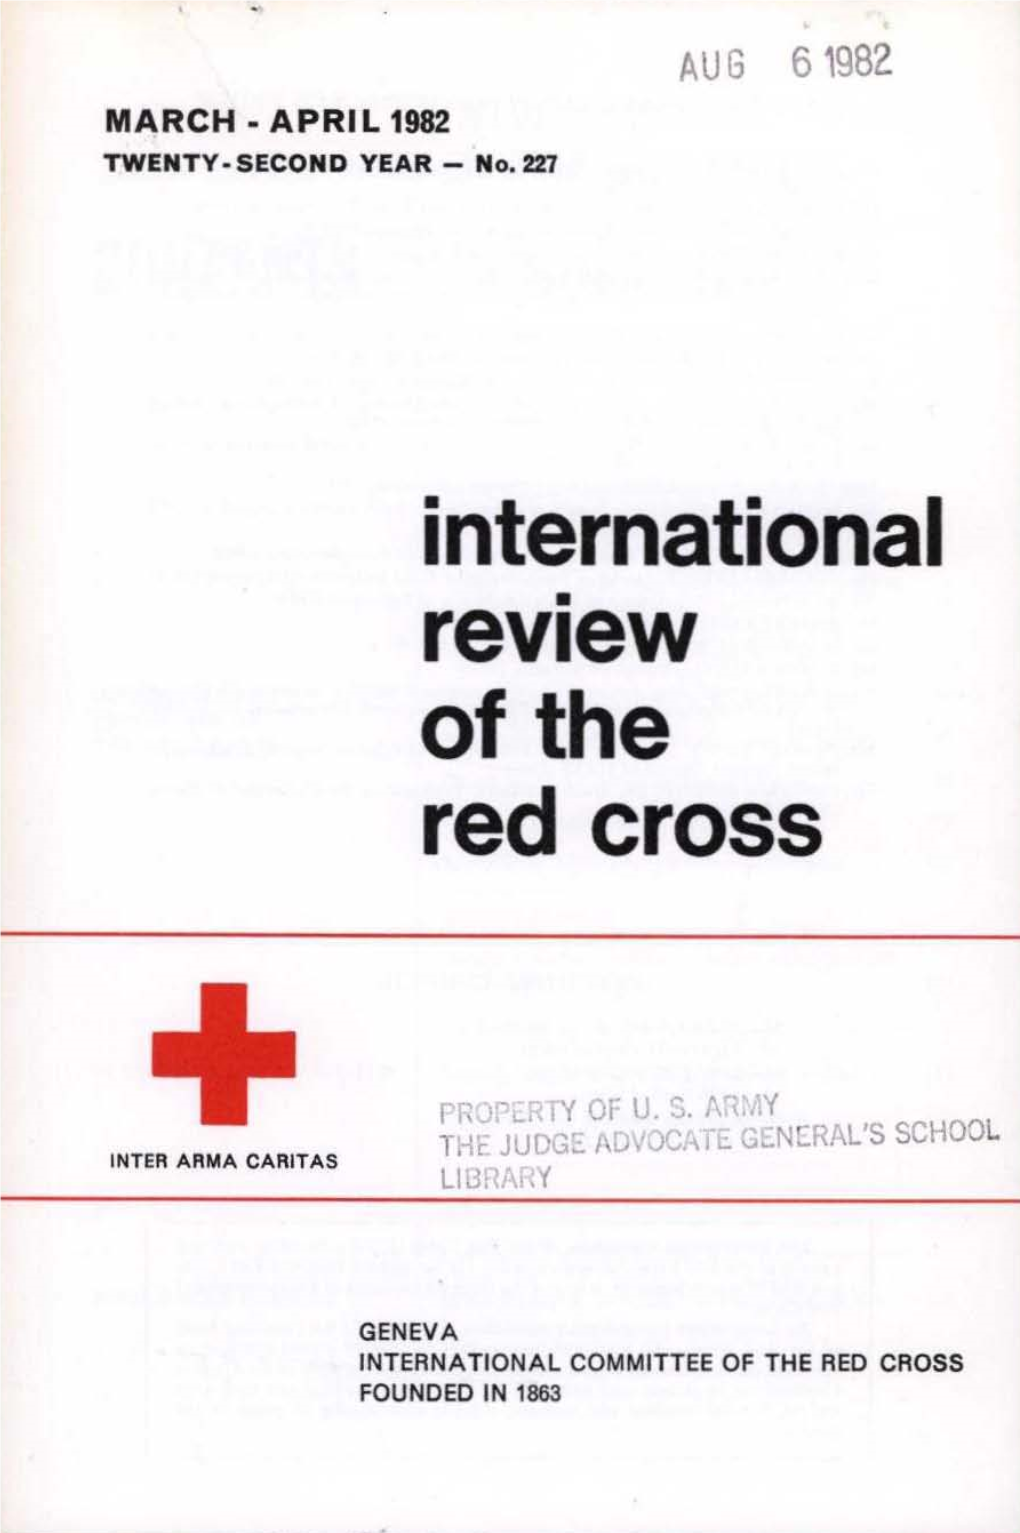 International Review of the Red Cross, March-April 1982, Twenty